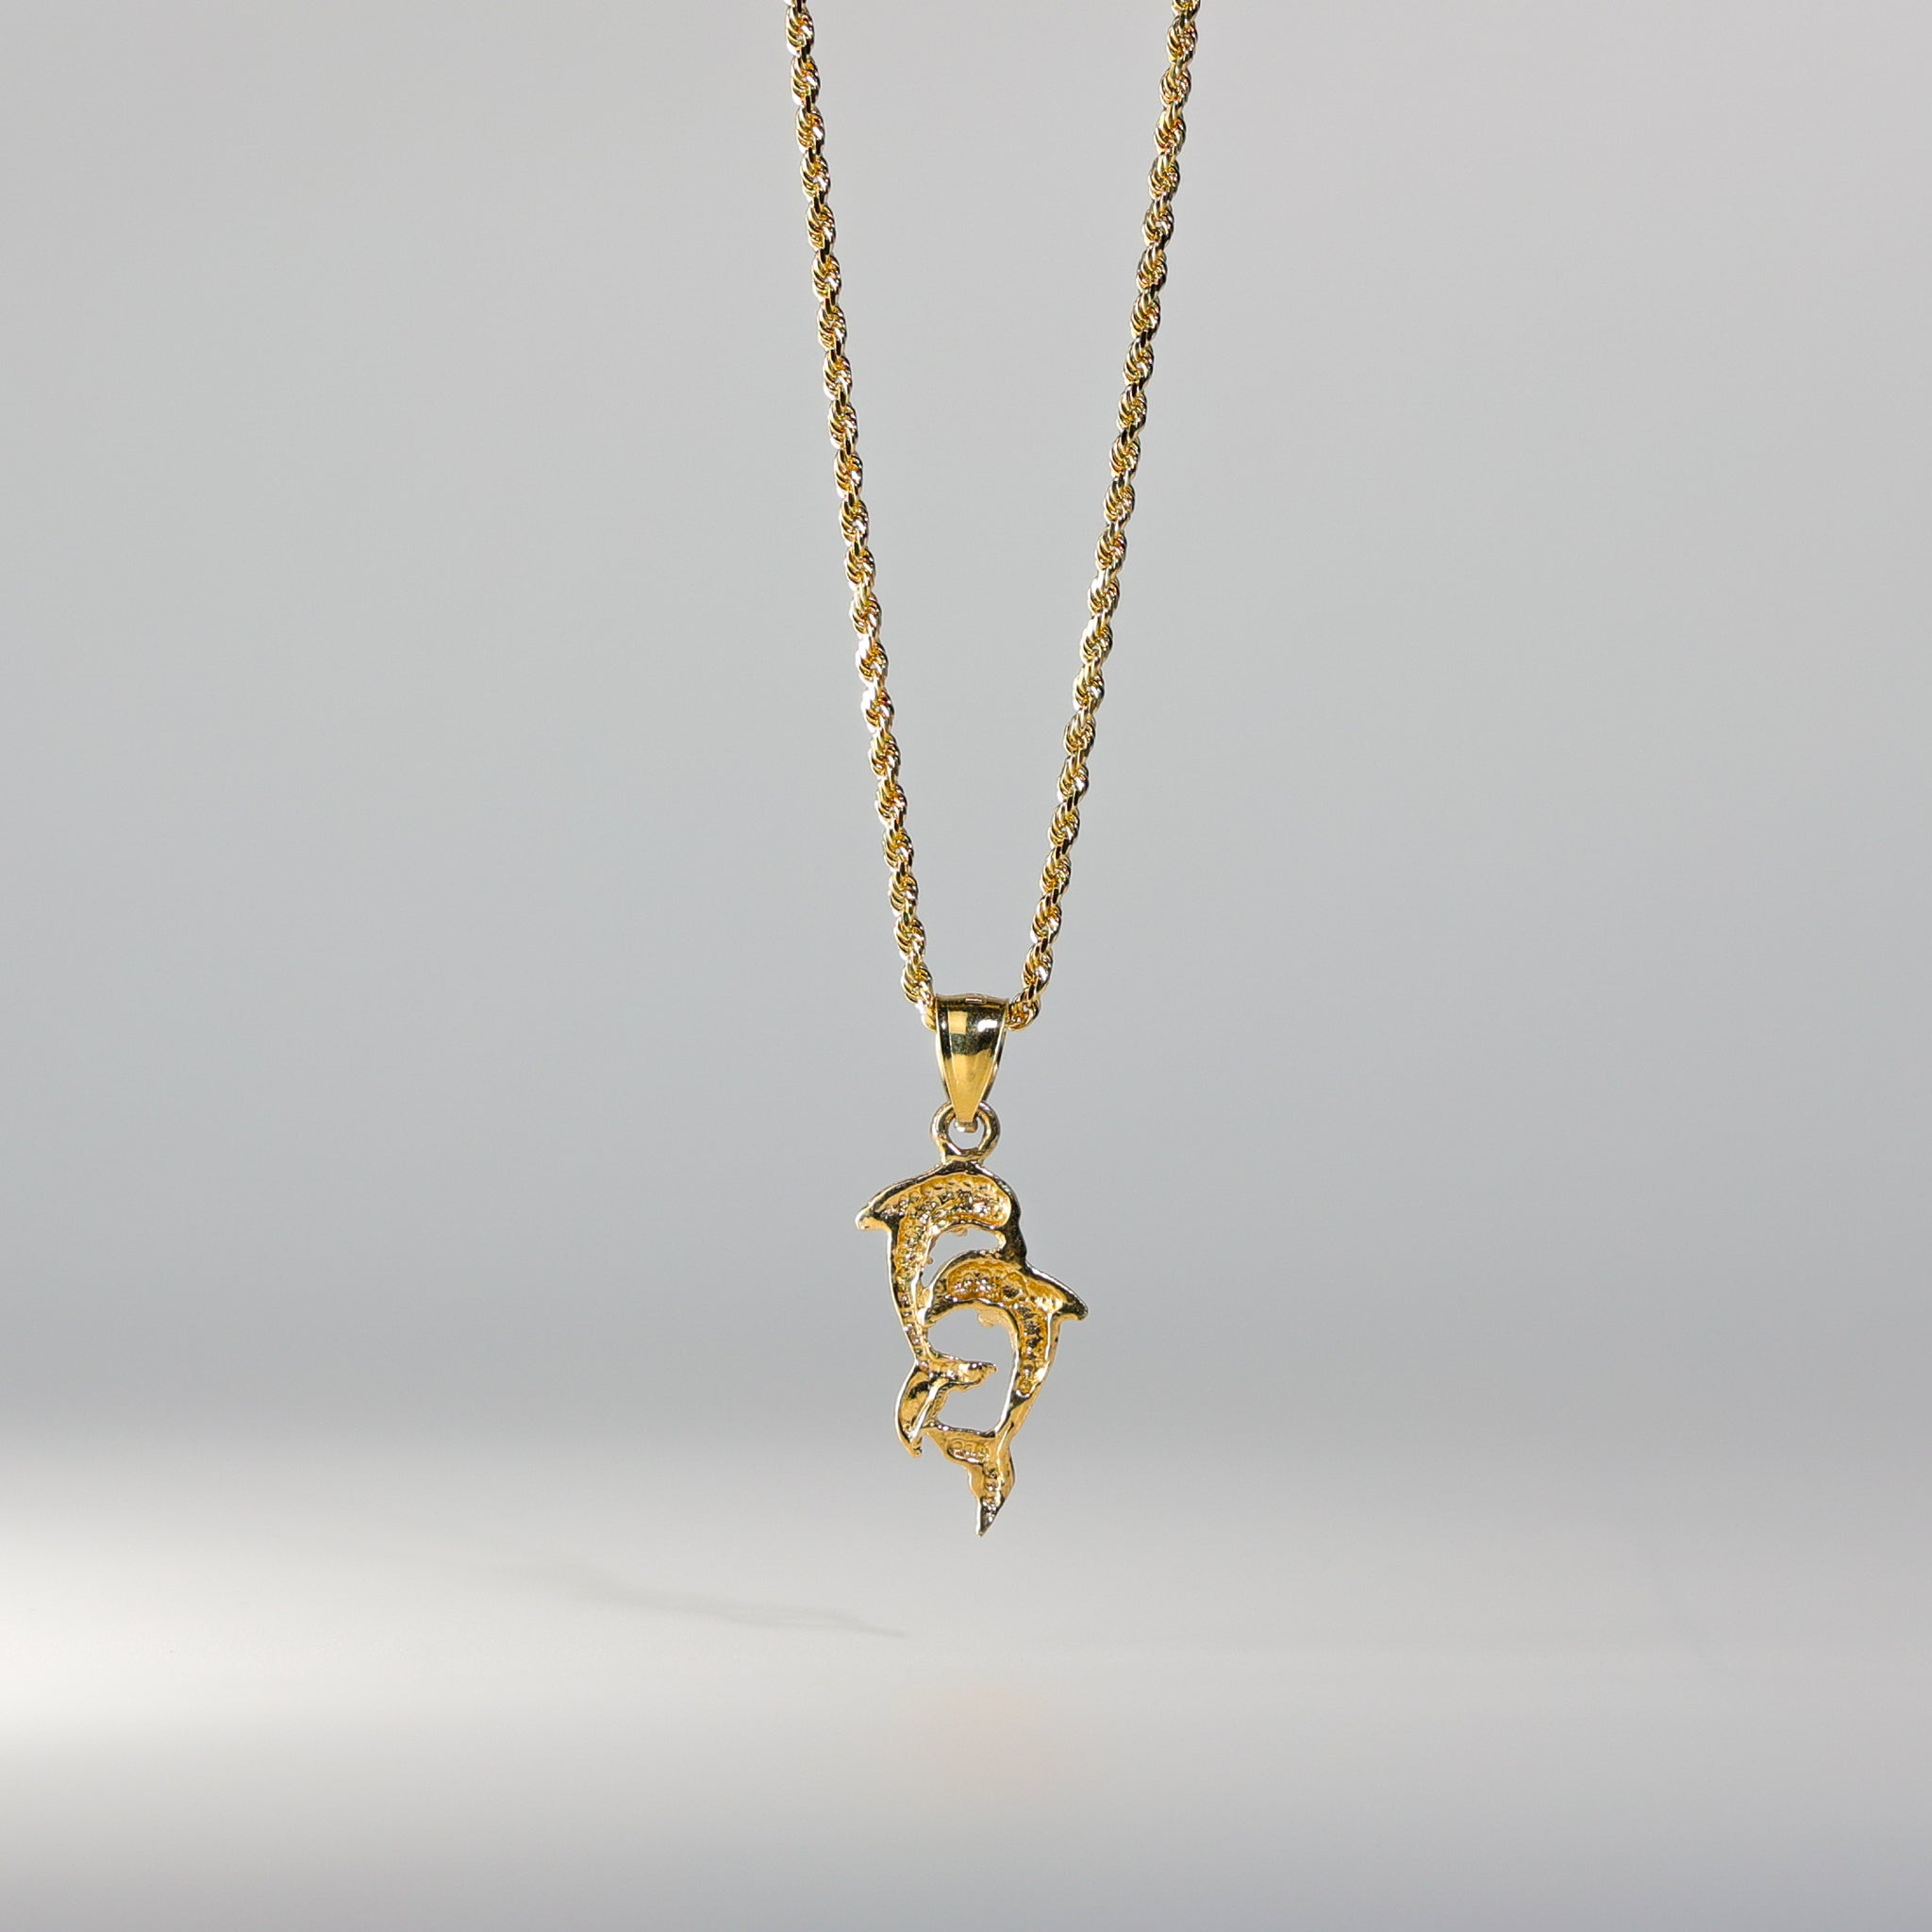 Gold Dolphin Pendant Model-1664 - Charlie & Co. Jewelry